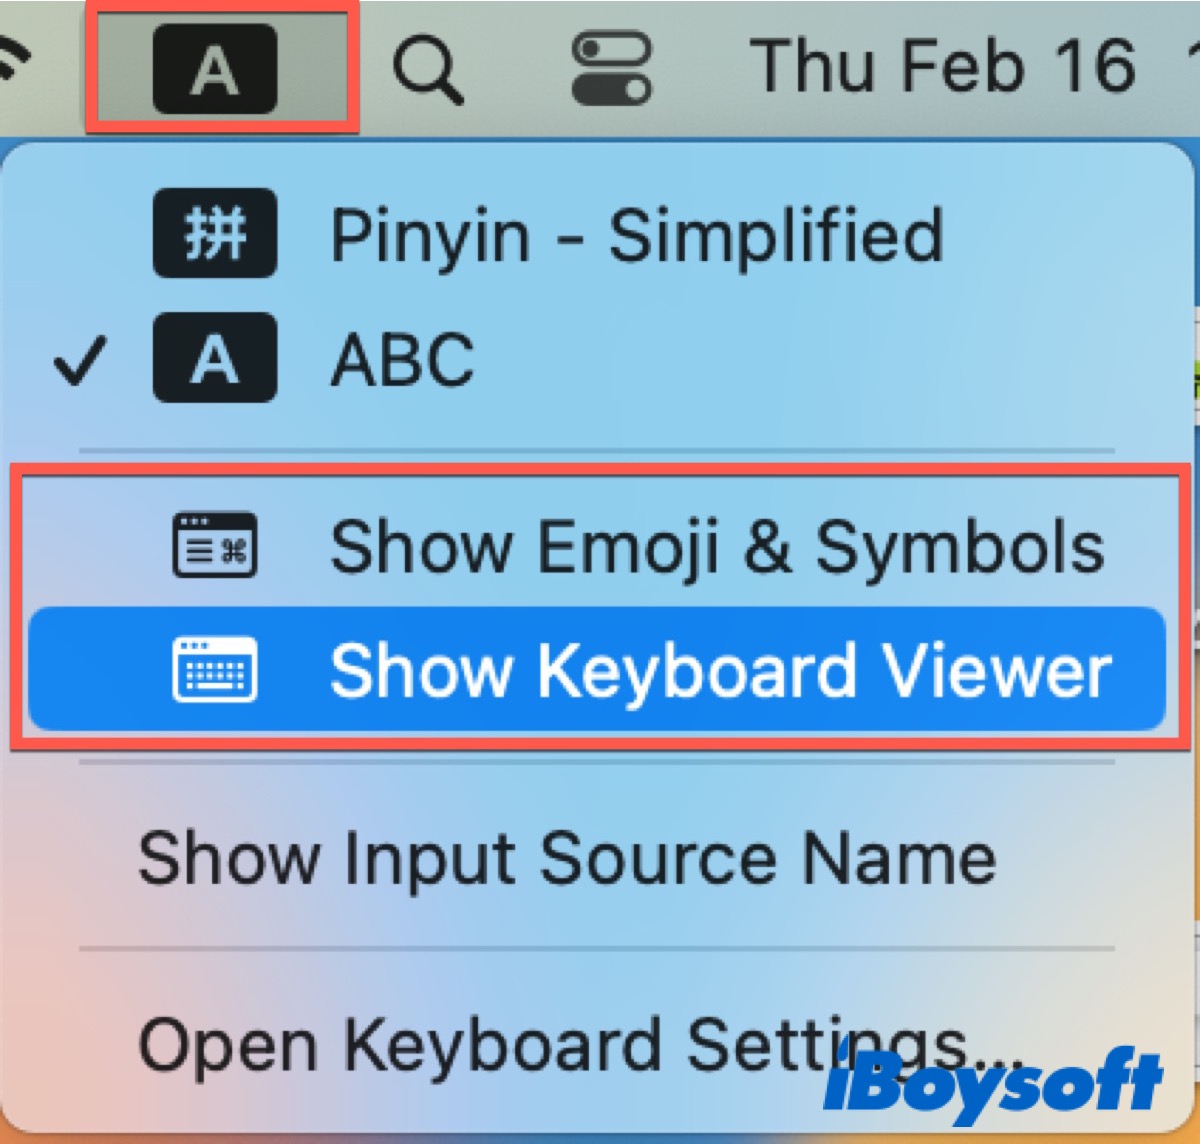 Open Accessibility Keyboard from Menu bar